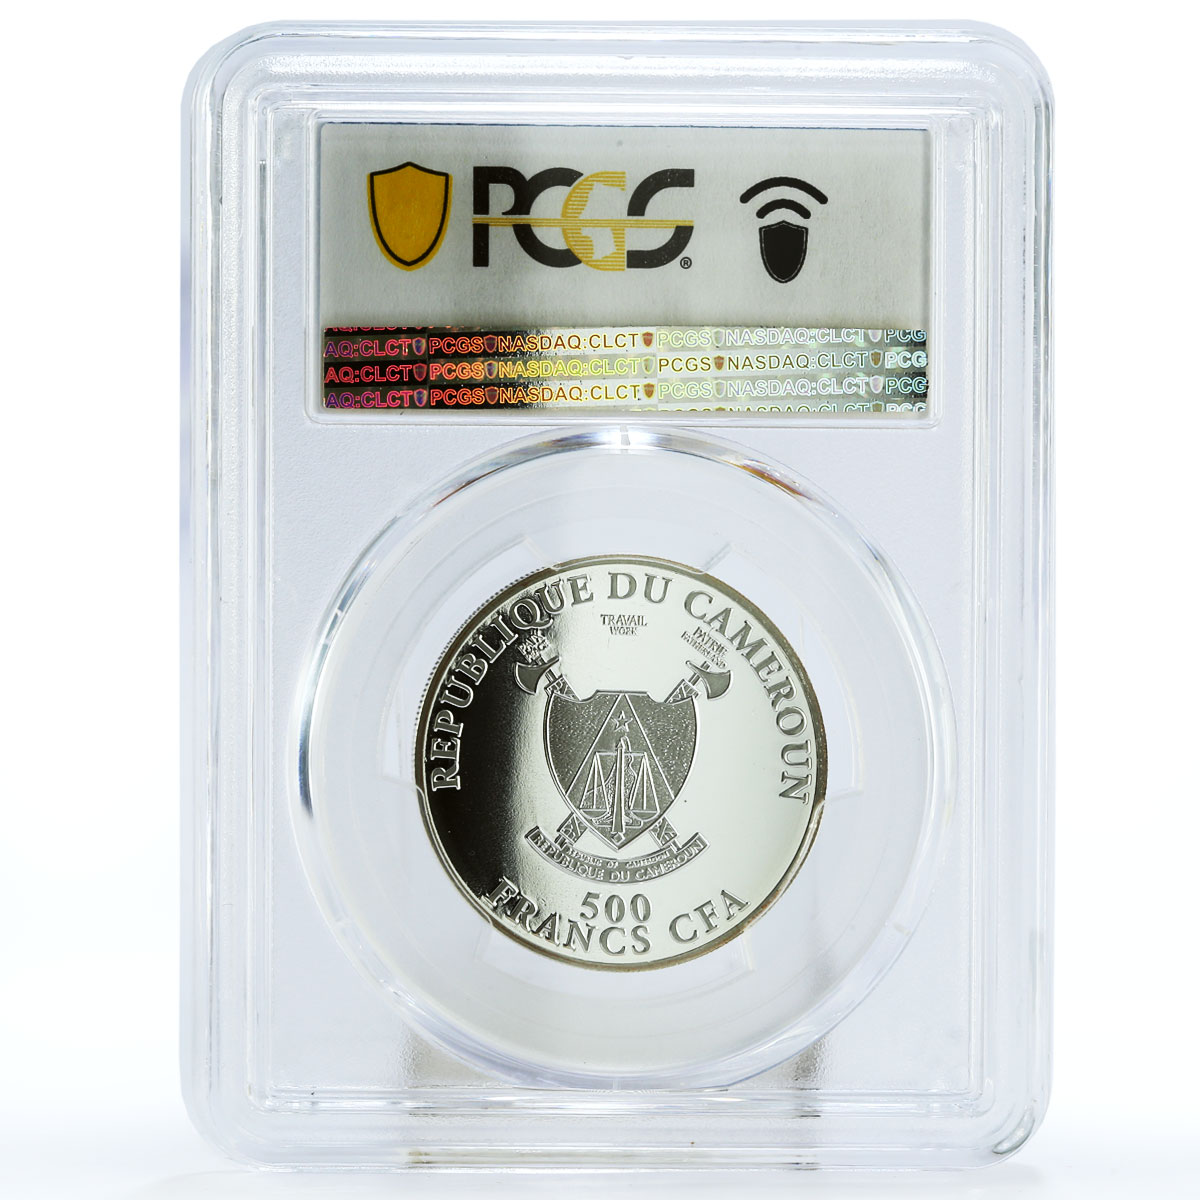 Cameroon 500 francs Odyssey Circe PR70 PCGS silver coin 2018